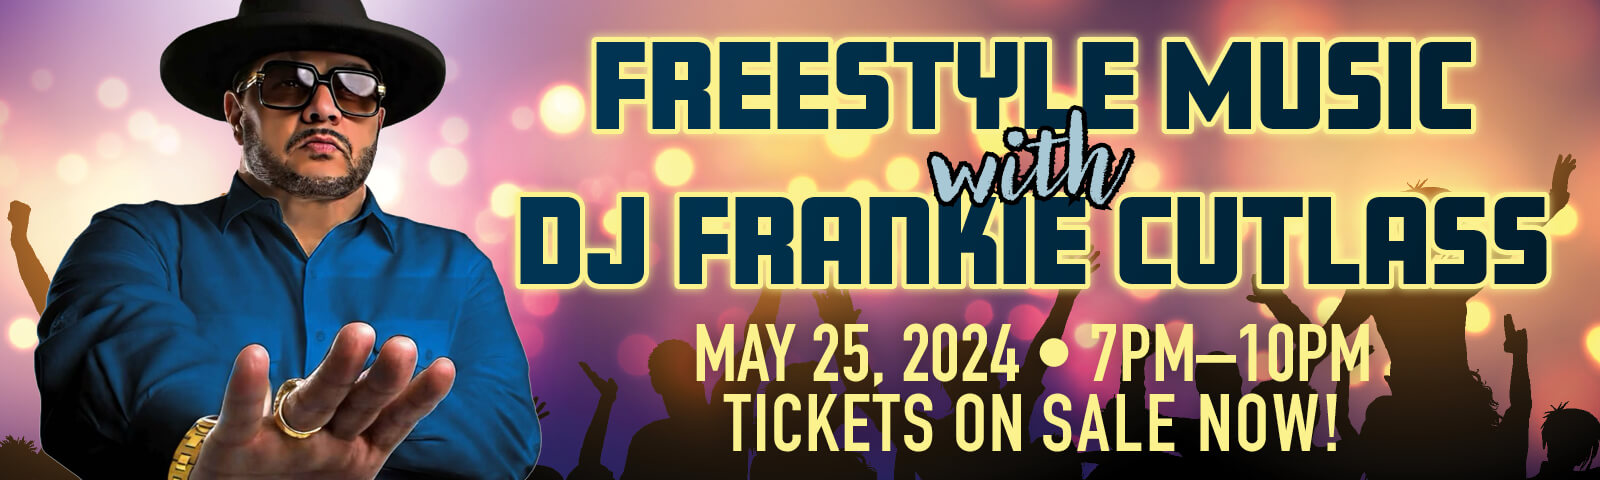 Freestyle Music with DJ Frankie Cutlass! May 25, 2024 — 7pm–10pm — Tickets on sale now!